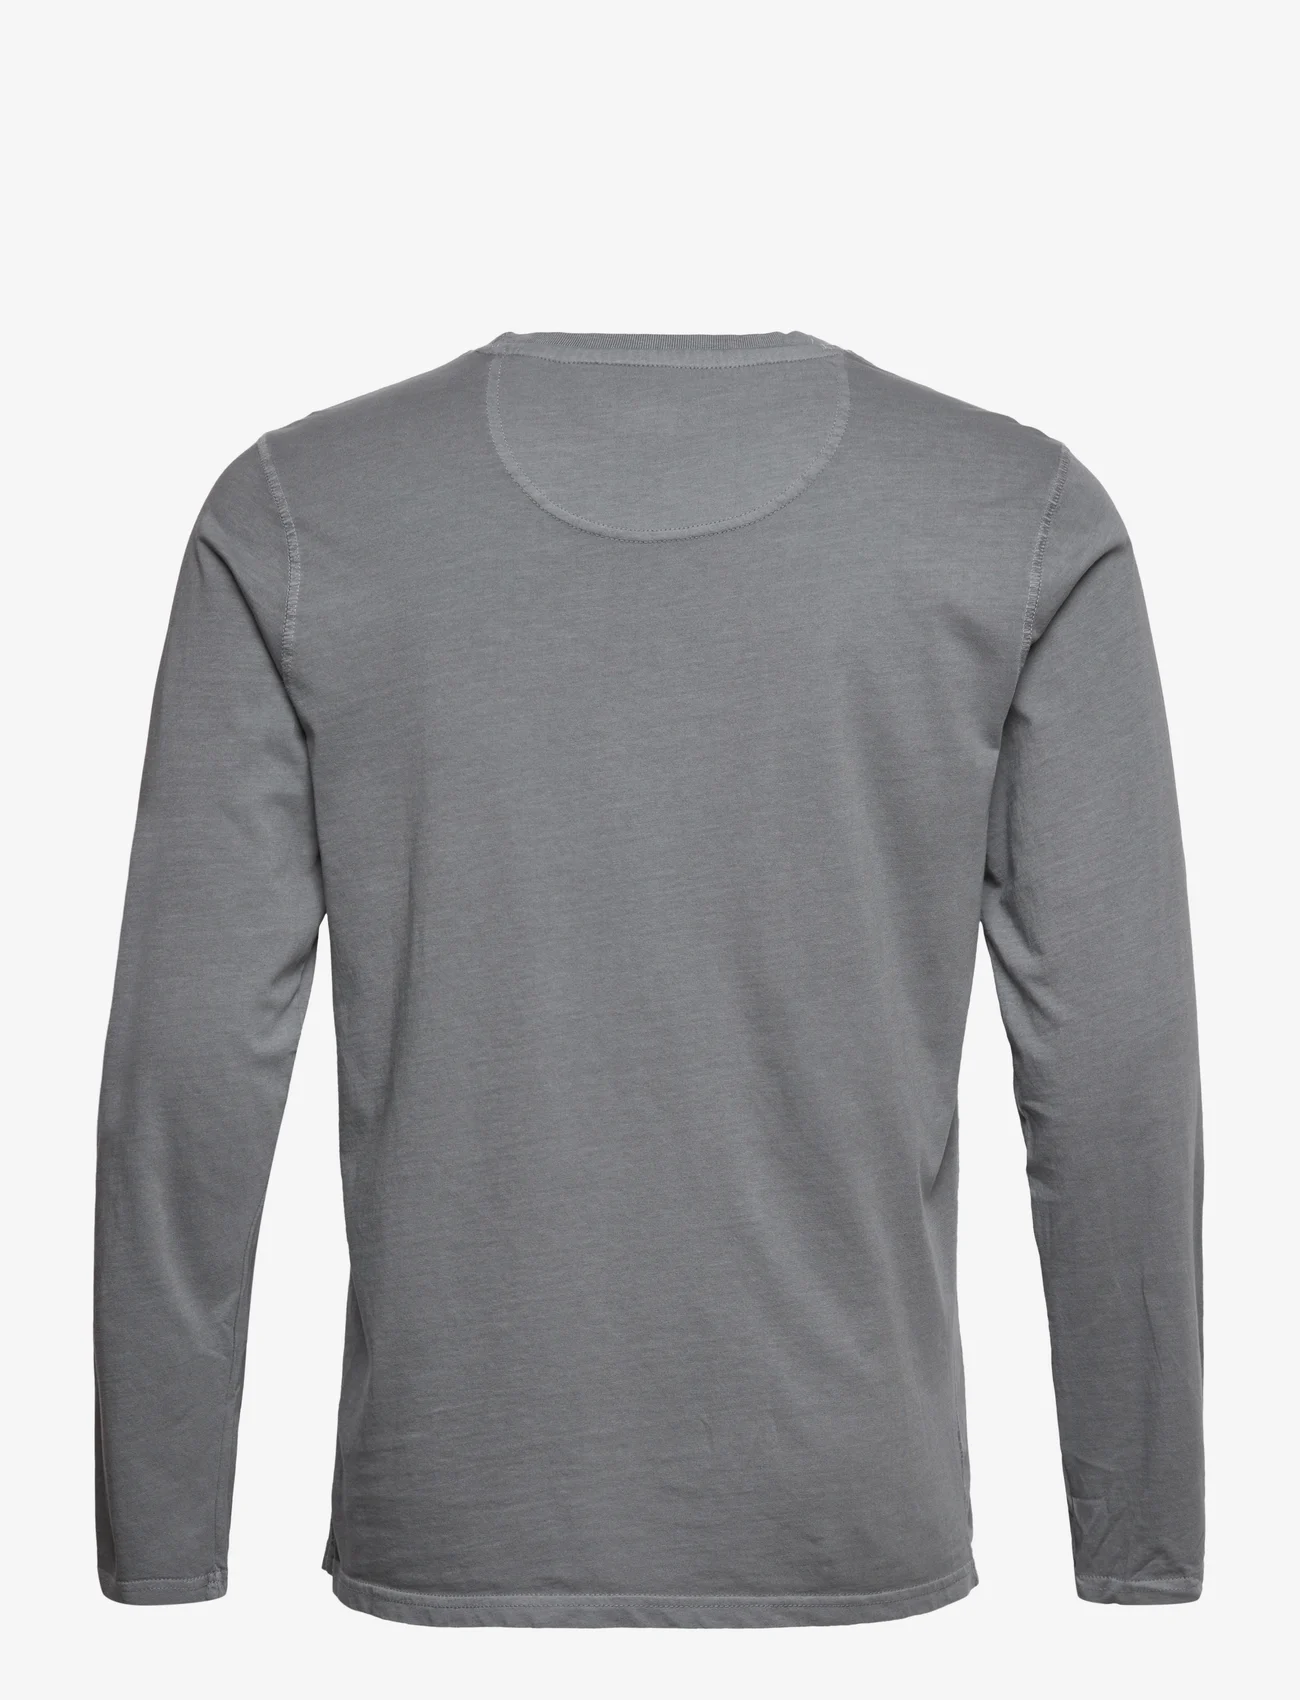 Shine Original - G/D brand carrier tee L/S - lowest prices - dk grey - 1